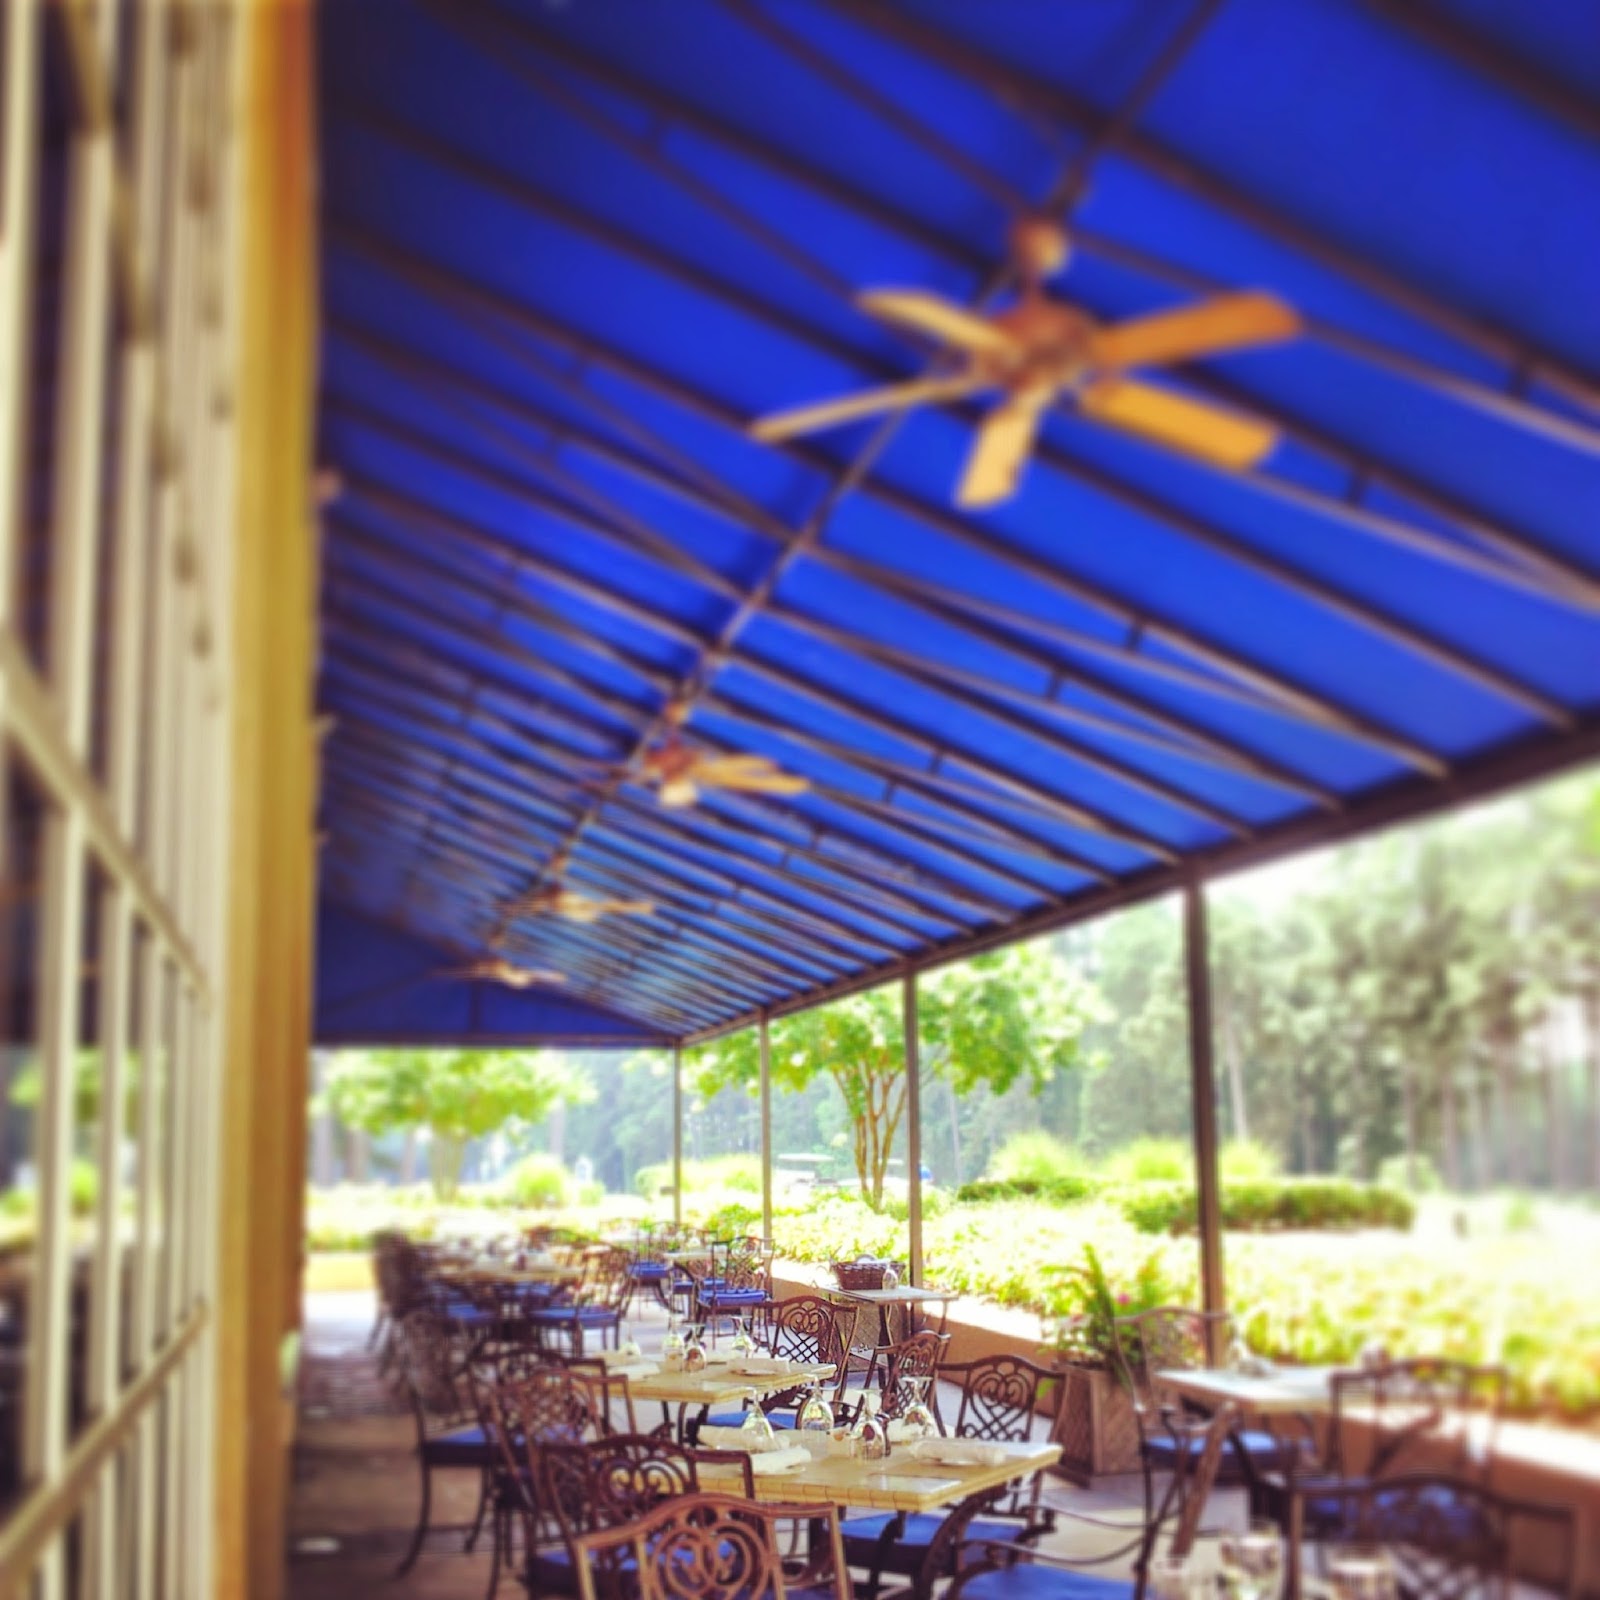 Outdoor patio at Fairview Dining Room at Washington Duke Inn. #outaboutnc